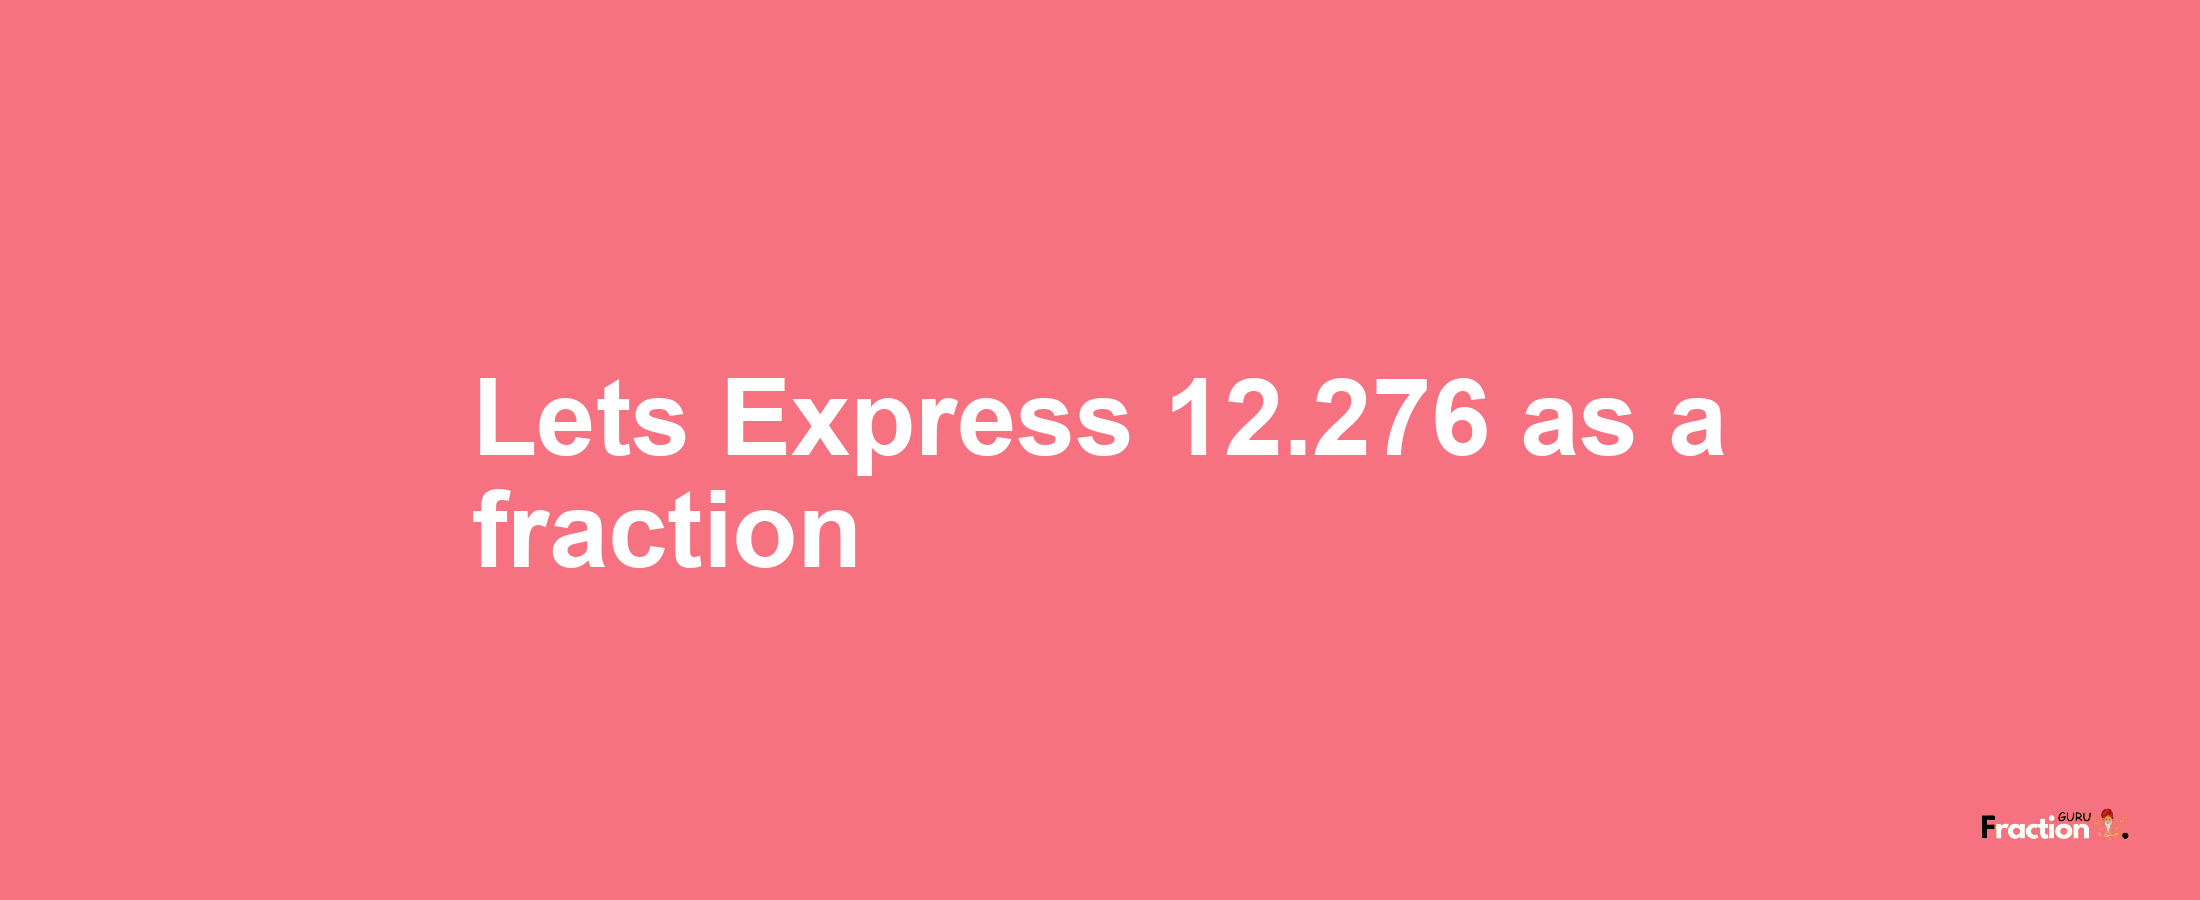 Lets Express 12.276 as afraction